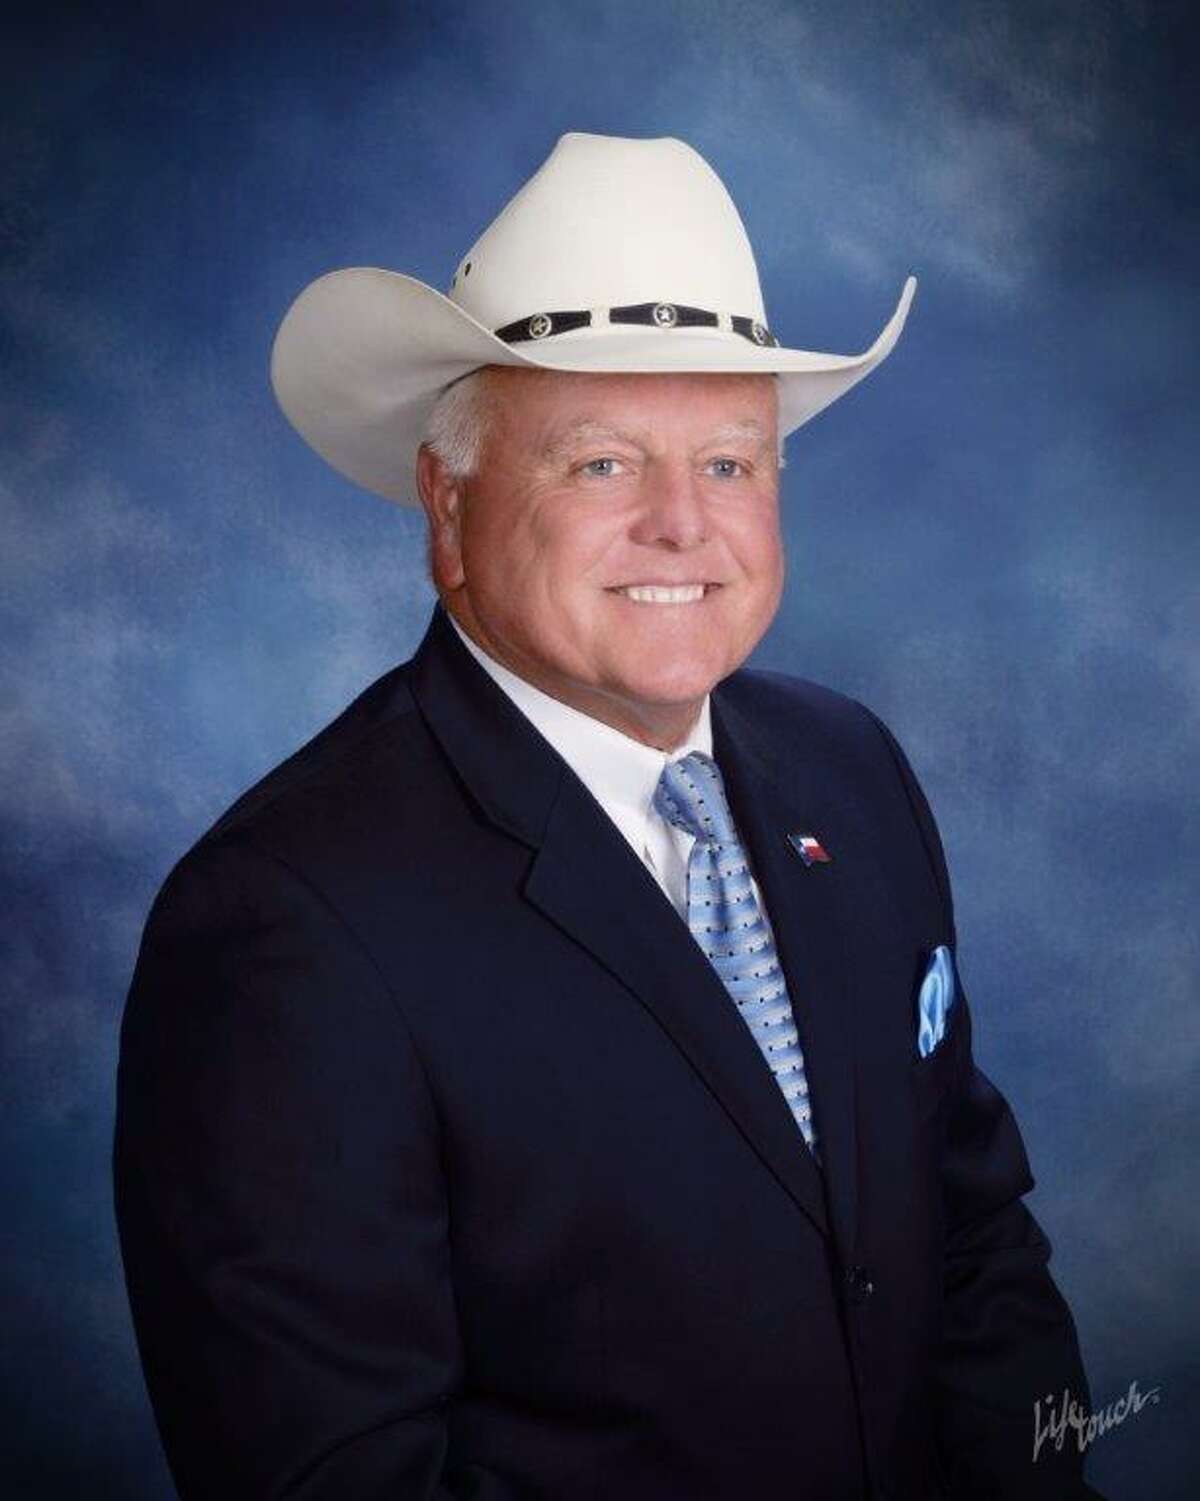 Sid Miller, who is running for re-election to agriculture commissioner, spent $640,985 dollars during the current reporting period. He has $401,953 in cash on hand.